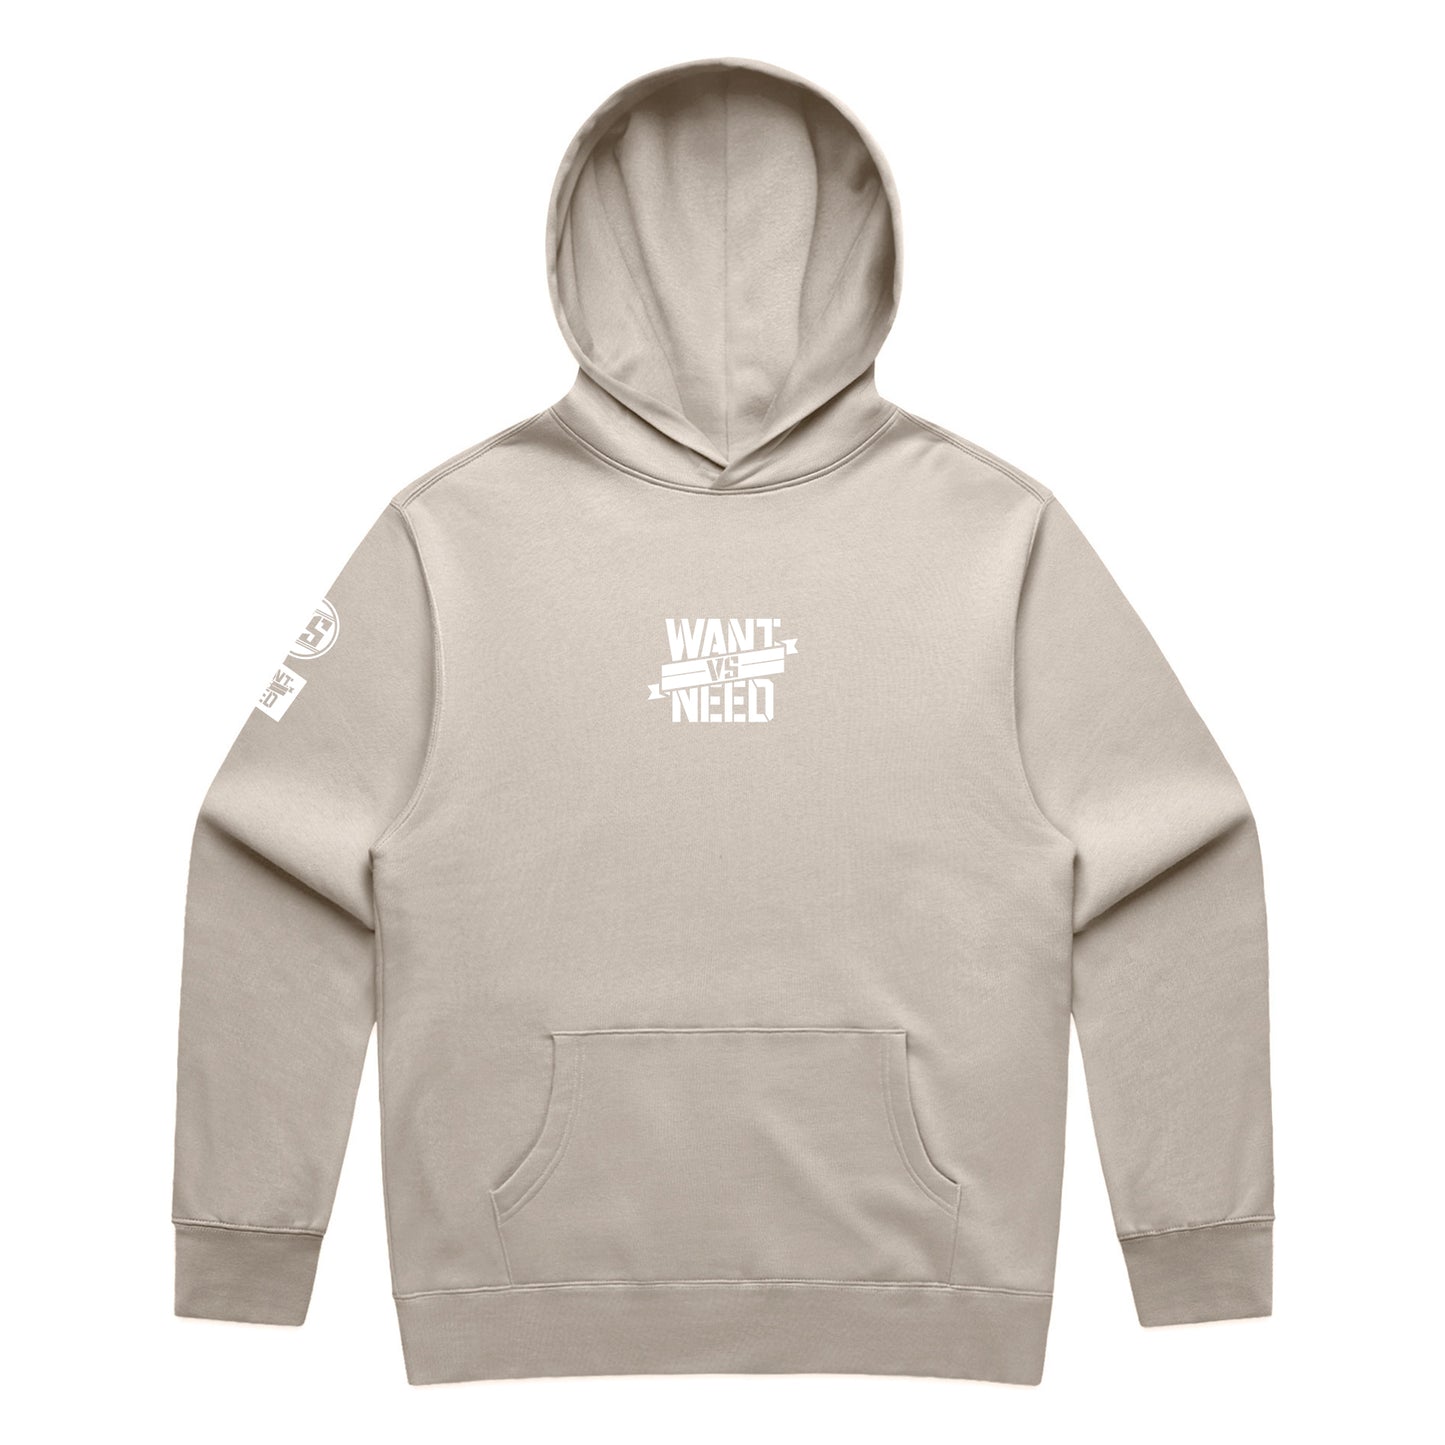 ADULT - BY ANY MEANS PULLOVER HOODIE - DUST